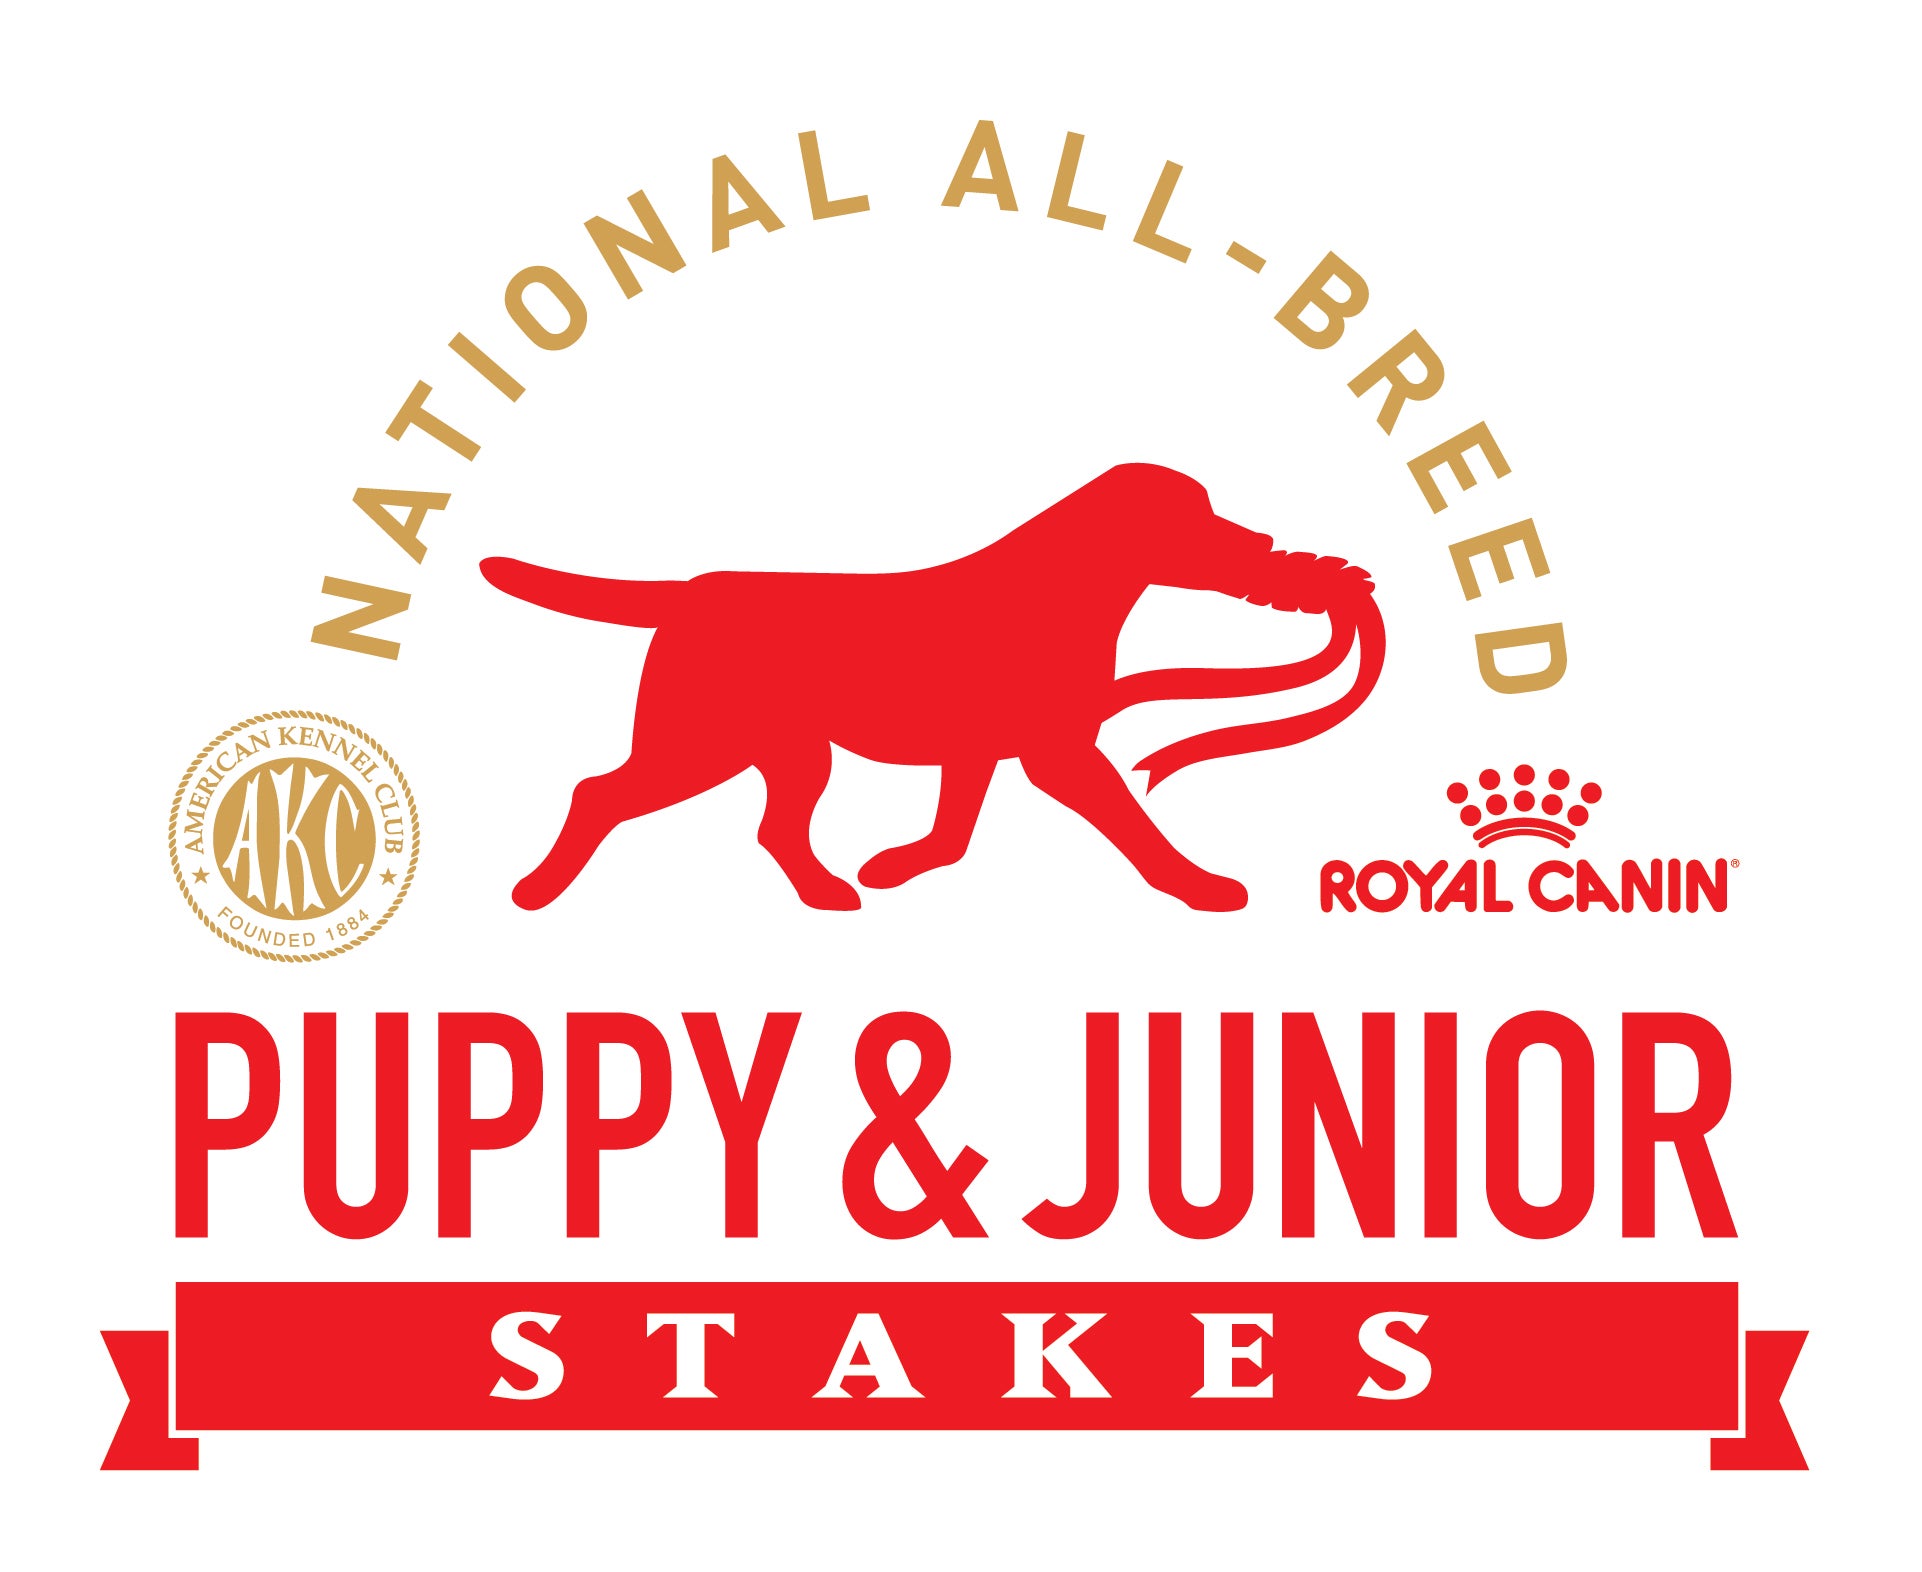 AKC/Royal Canin National AllBreed Puppy & Junior Stakes American